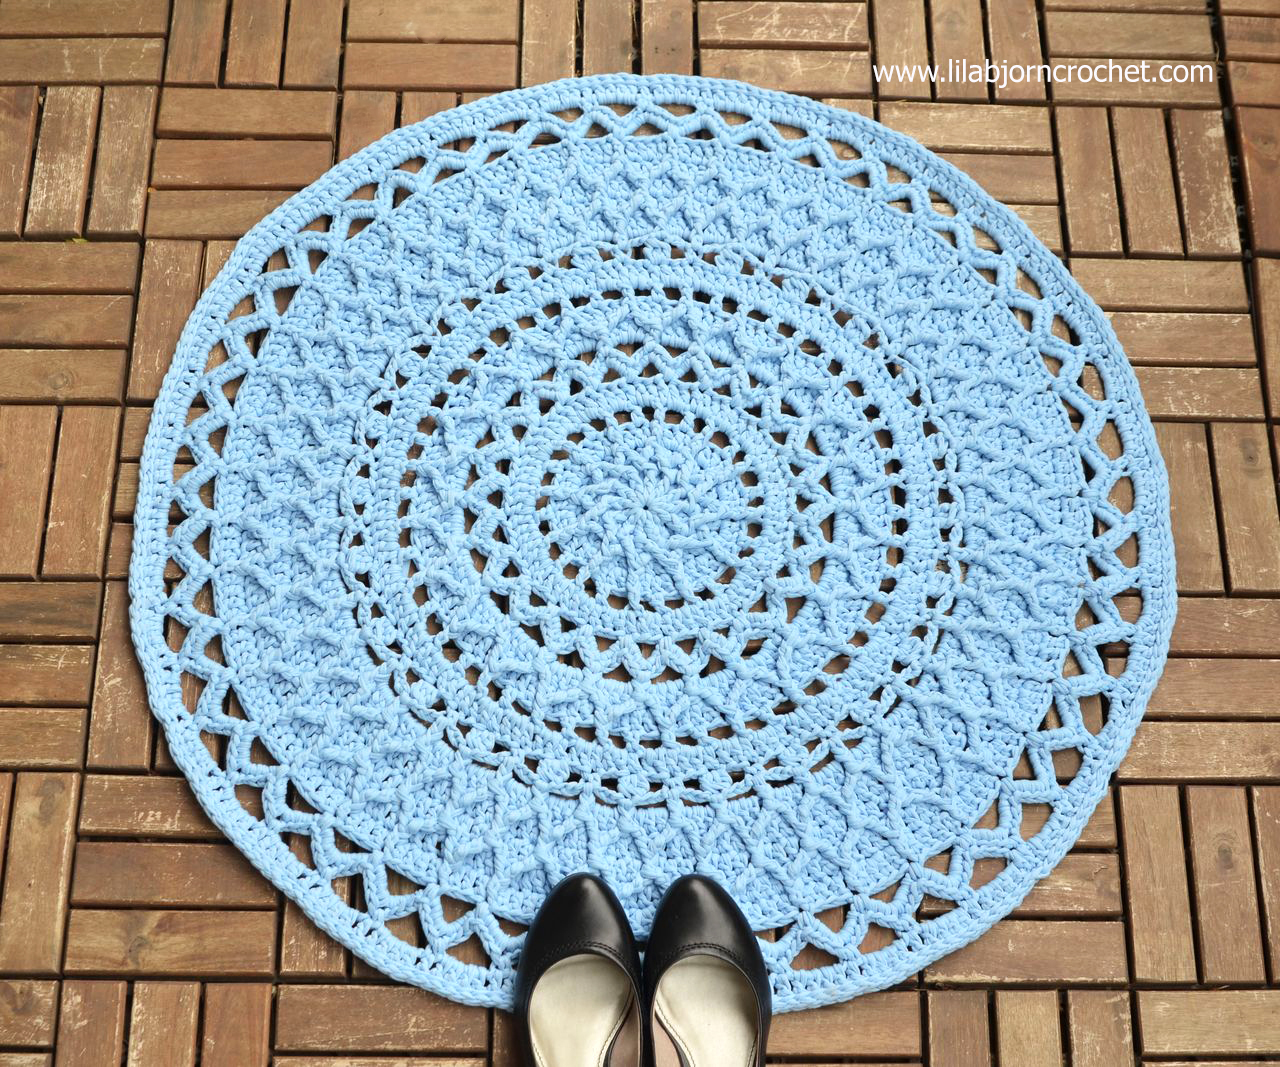 Andromeda Mandala Rug combines textured stitches with open, lace parts. The pattern can also be used for a doily when lighter yarns and small hook are used. Original design by Lilla Bjorn Crochet.